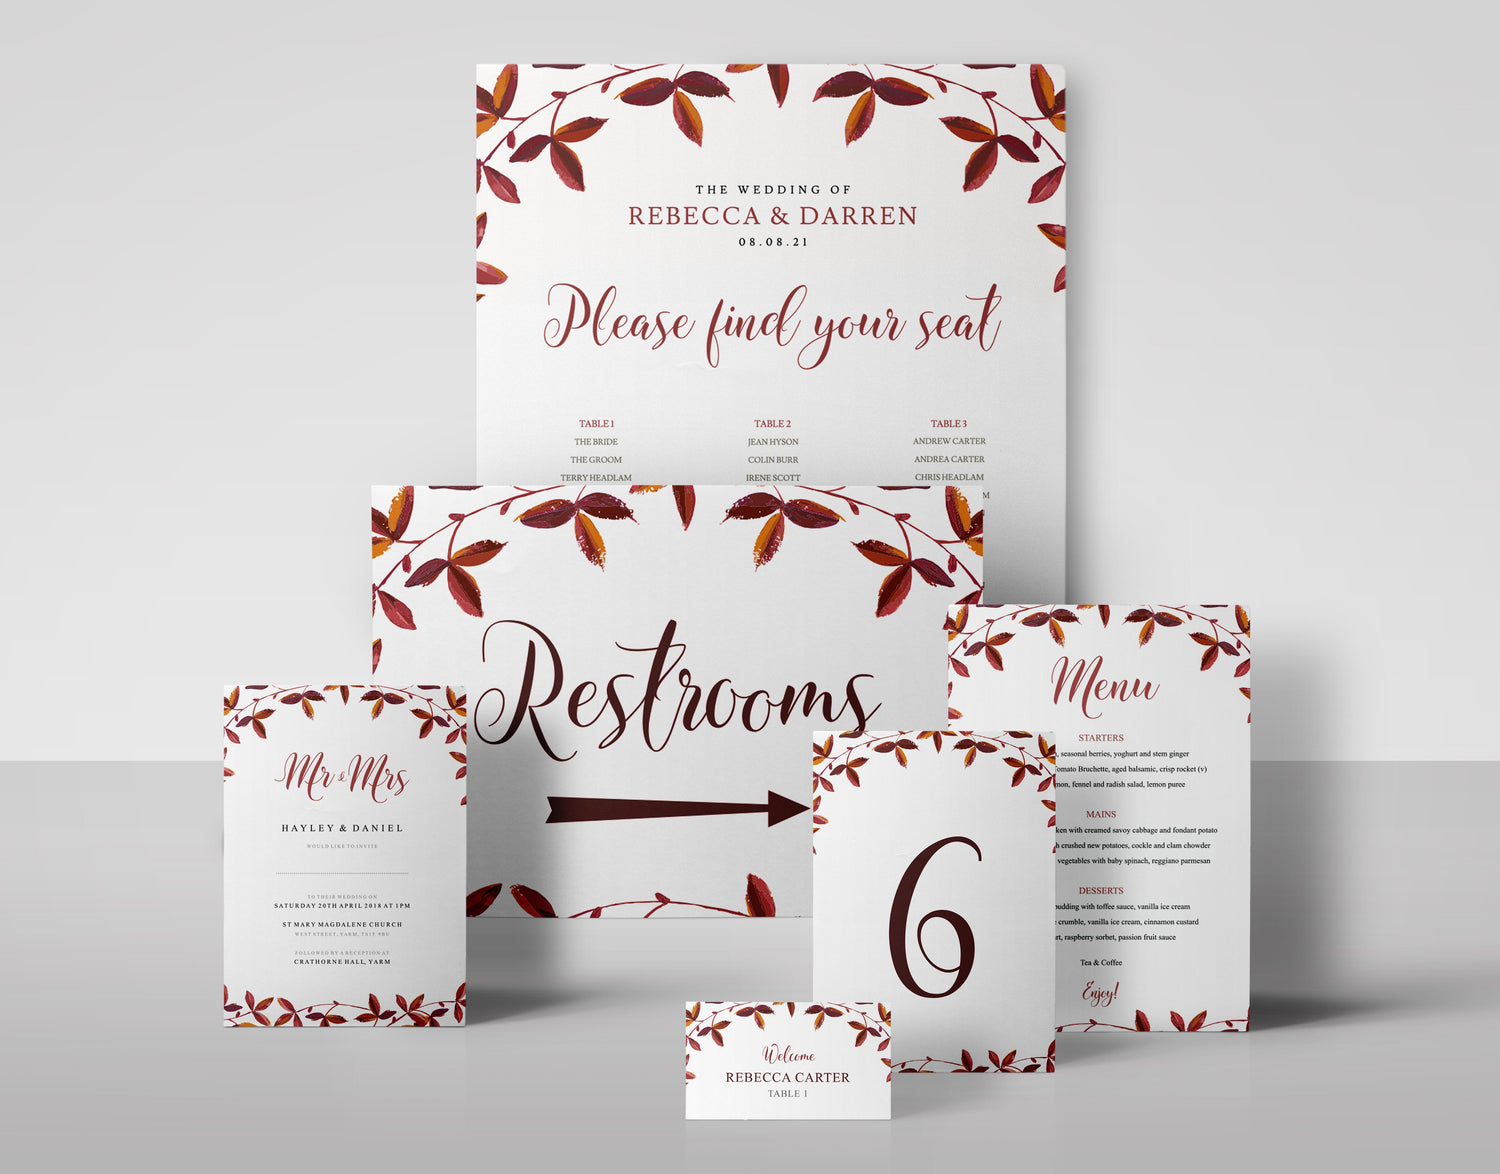 Autumn Collection with rustic red, orange, and brown leaves Templates for seating charts, wedding signs, invitations